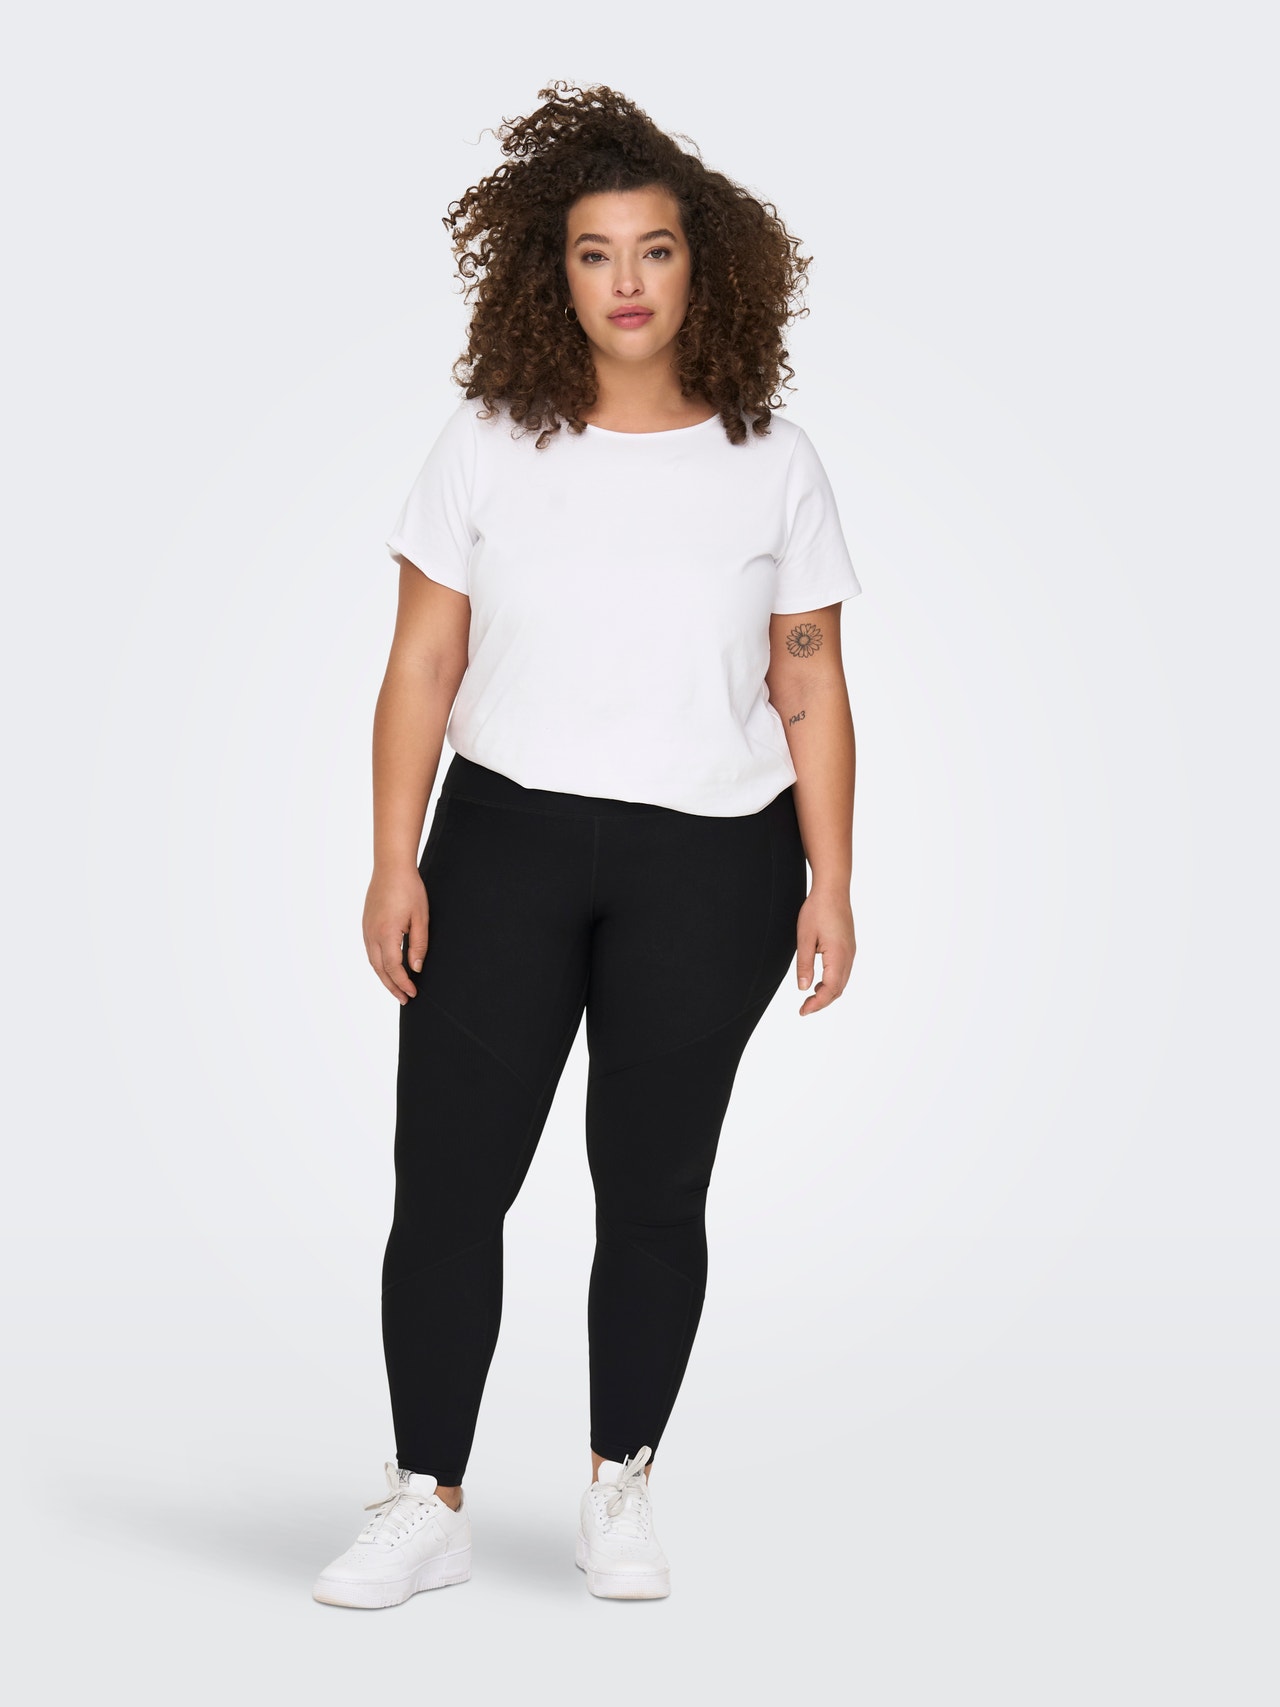 ONLY Curvy training tights -Black - 15276824